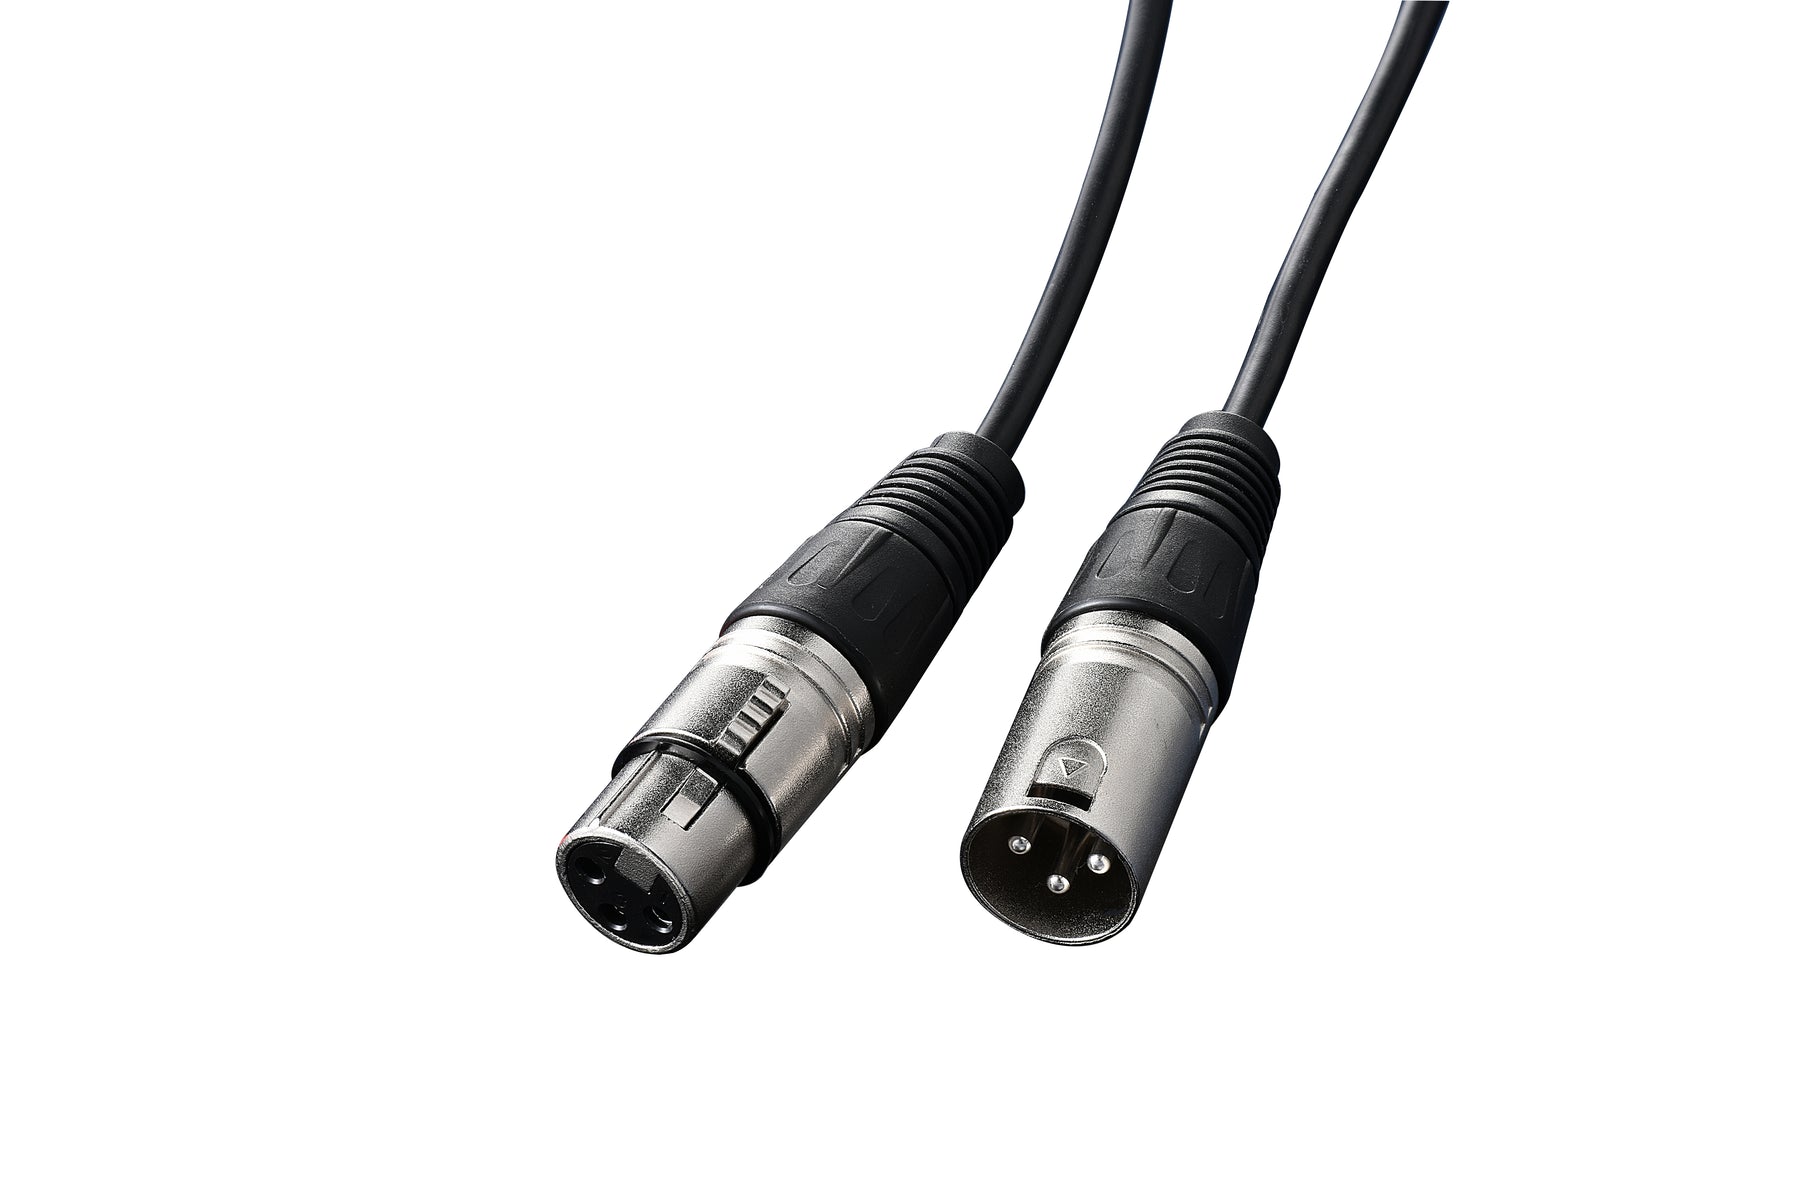 IBRA XLR Mic Cable Premium Quality Pro Microphone Lead | Balanced Male XLR to Female XLR | 10 Metre | Clearer Sound for PA Systems, Studio Recording, Mixers, Amplification & Speakers - BLACK